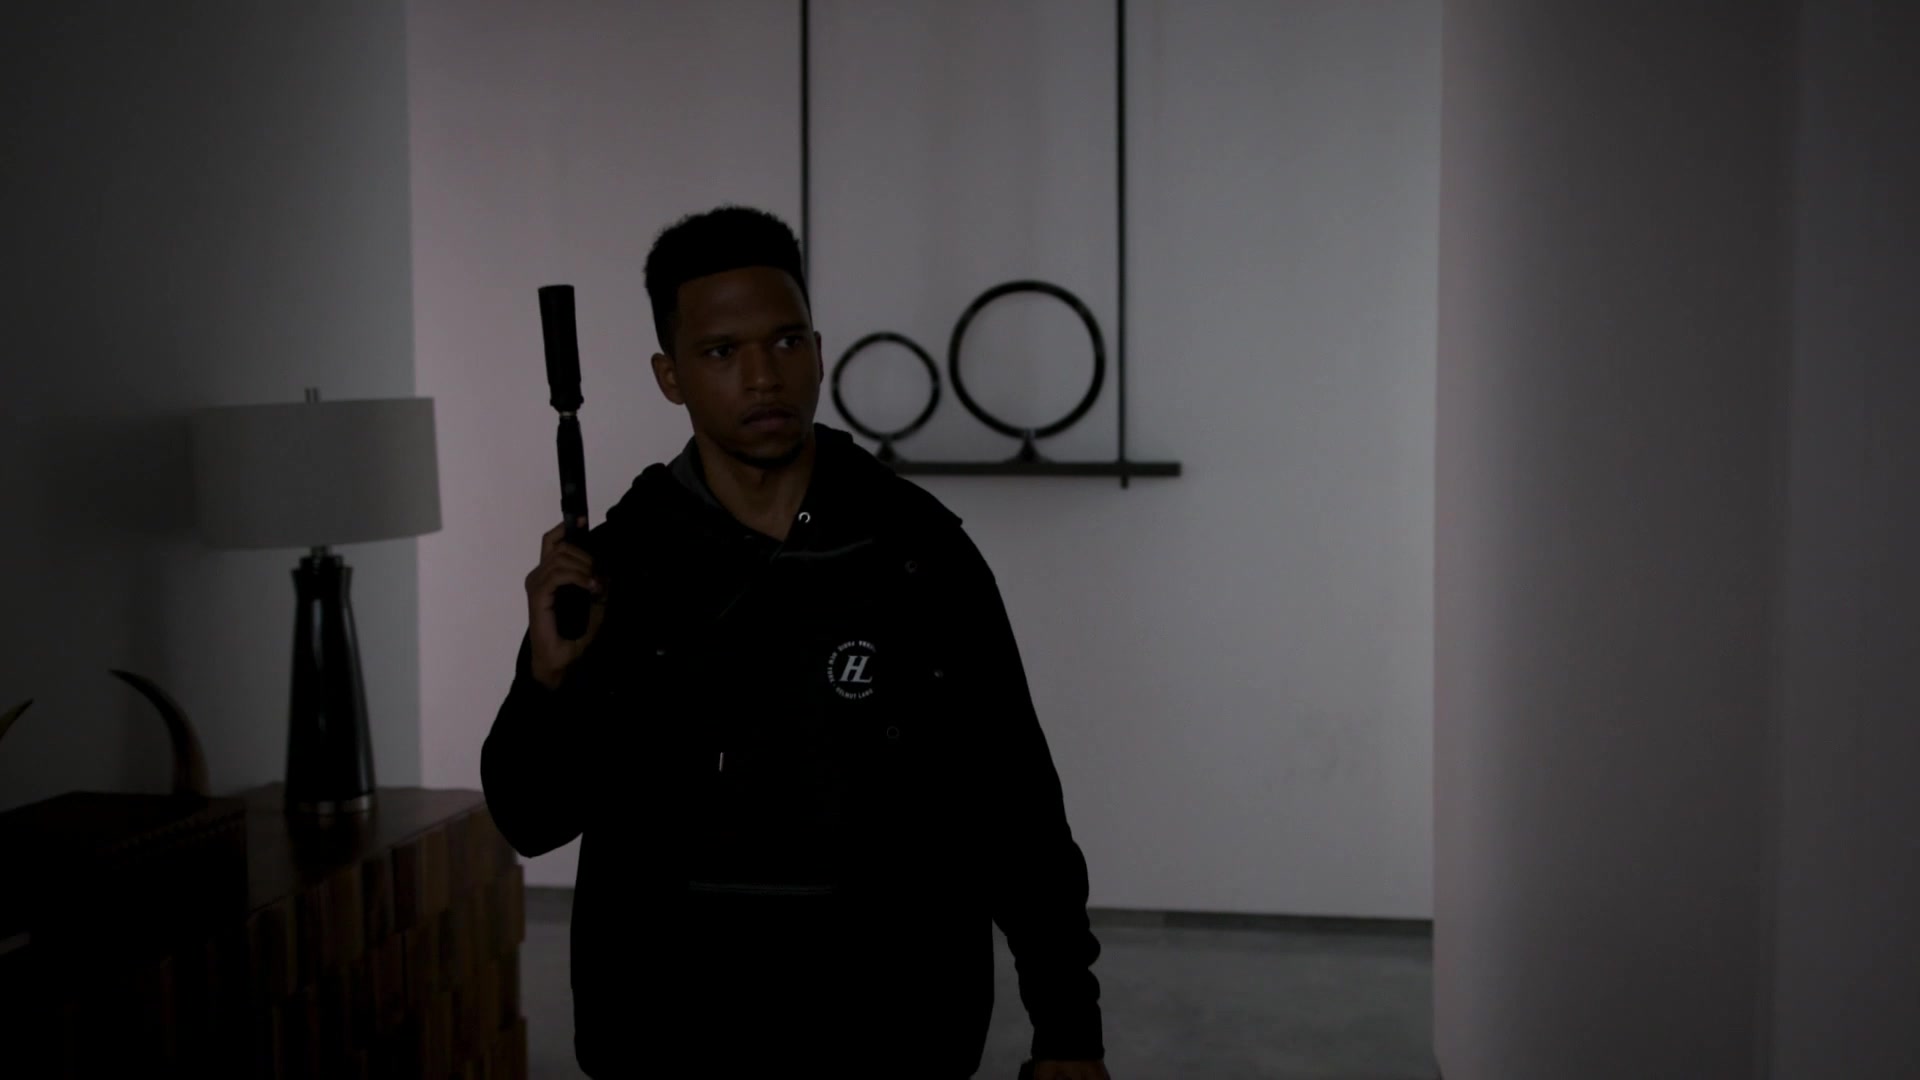 I analyzed a TV Show and product placement was spotted: Helmut Lang HL Men’...